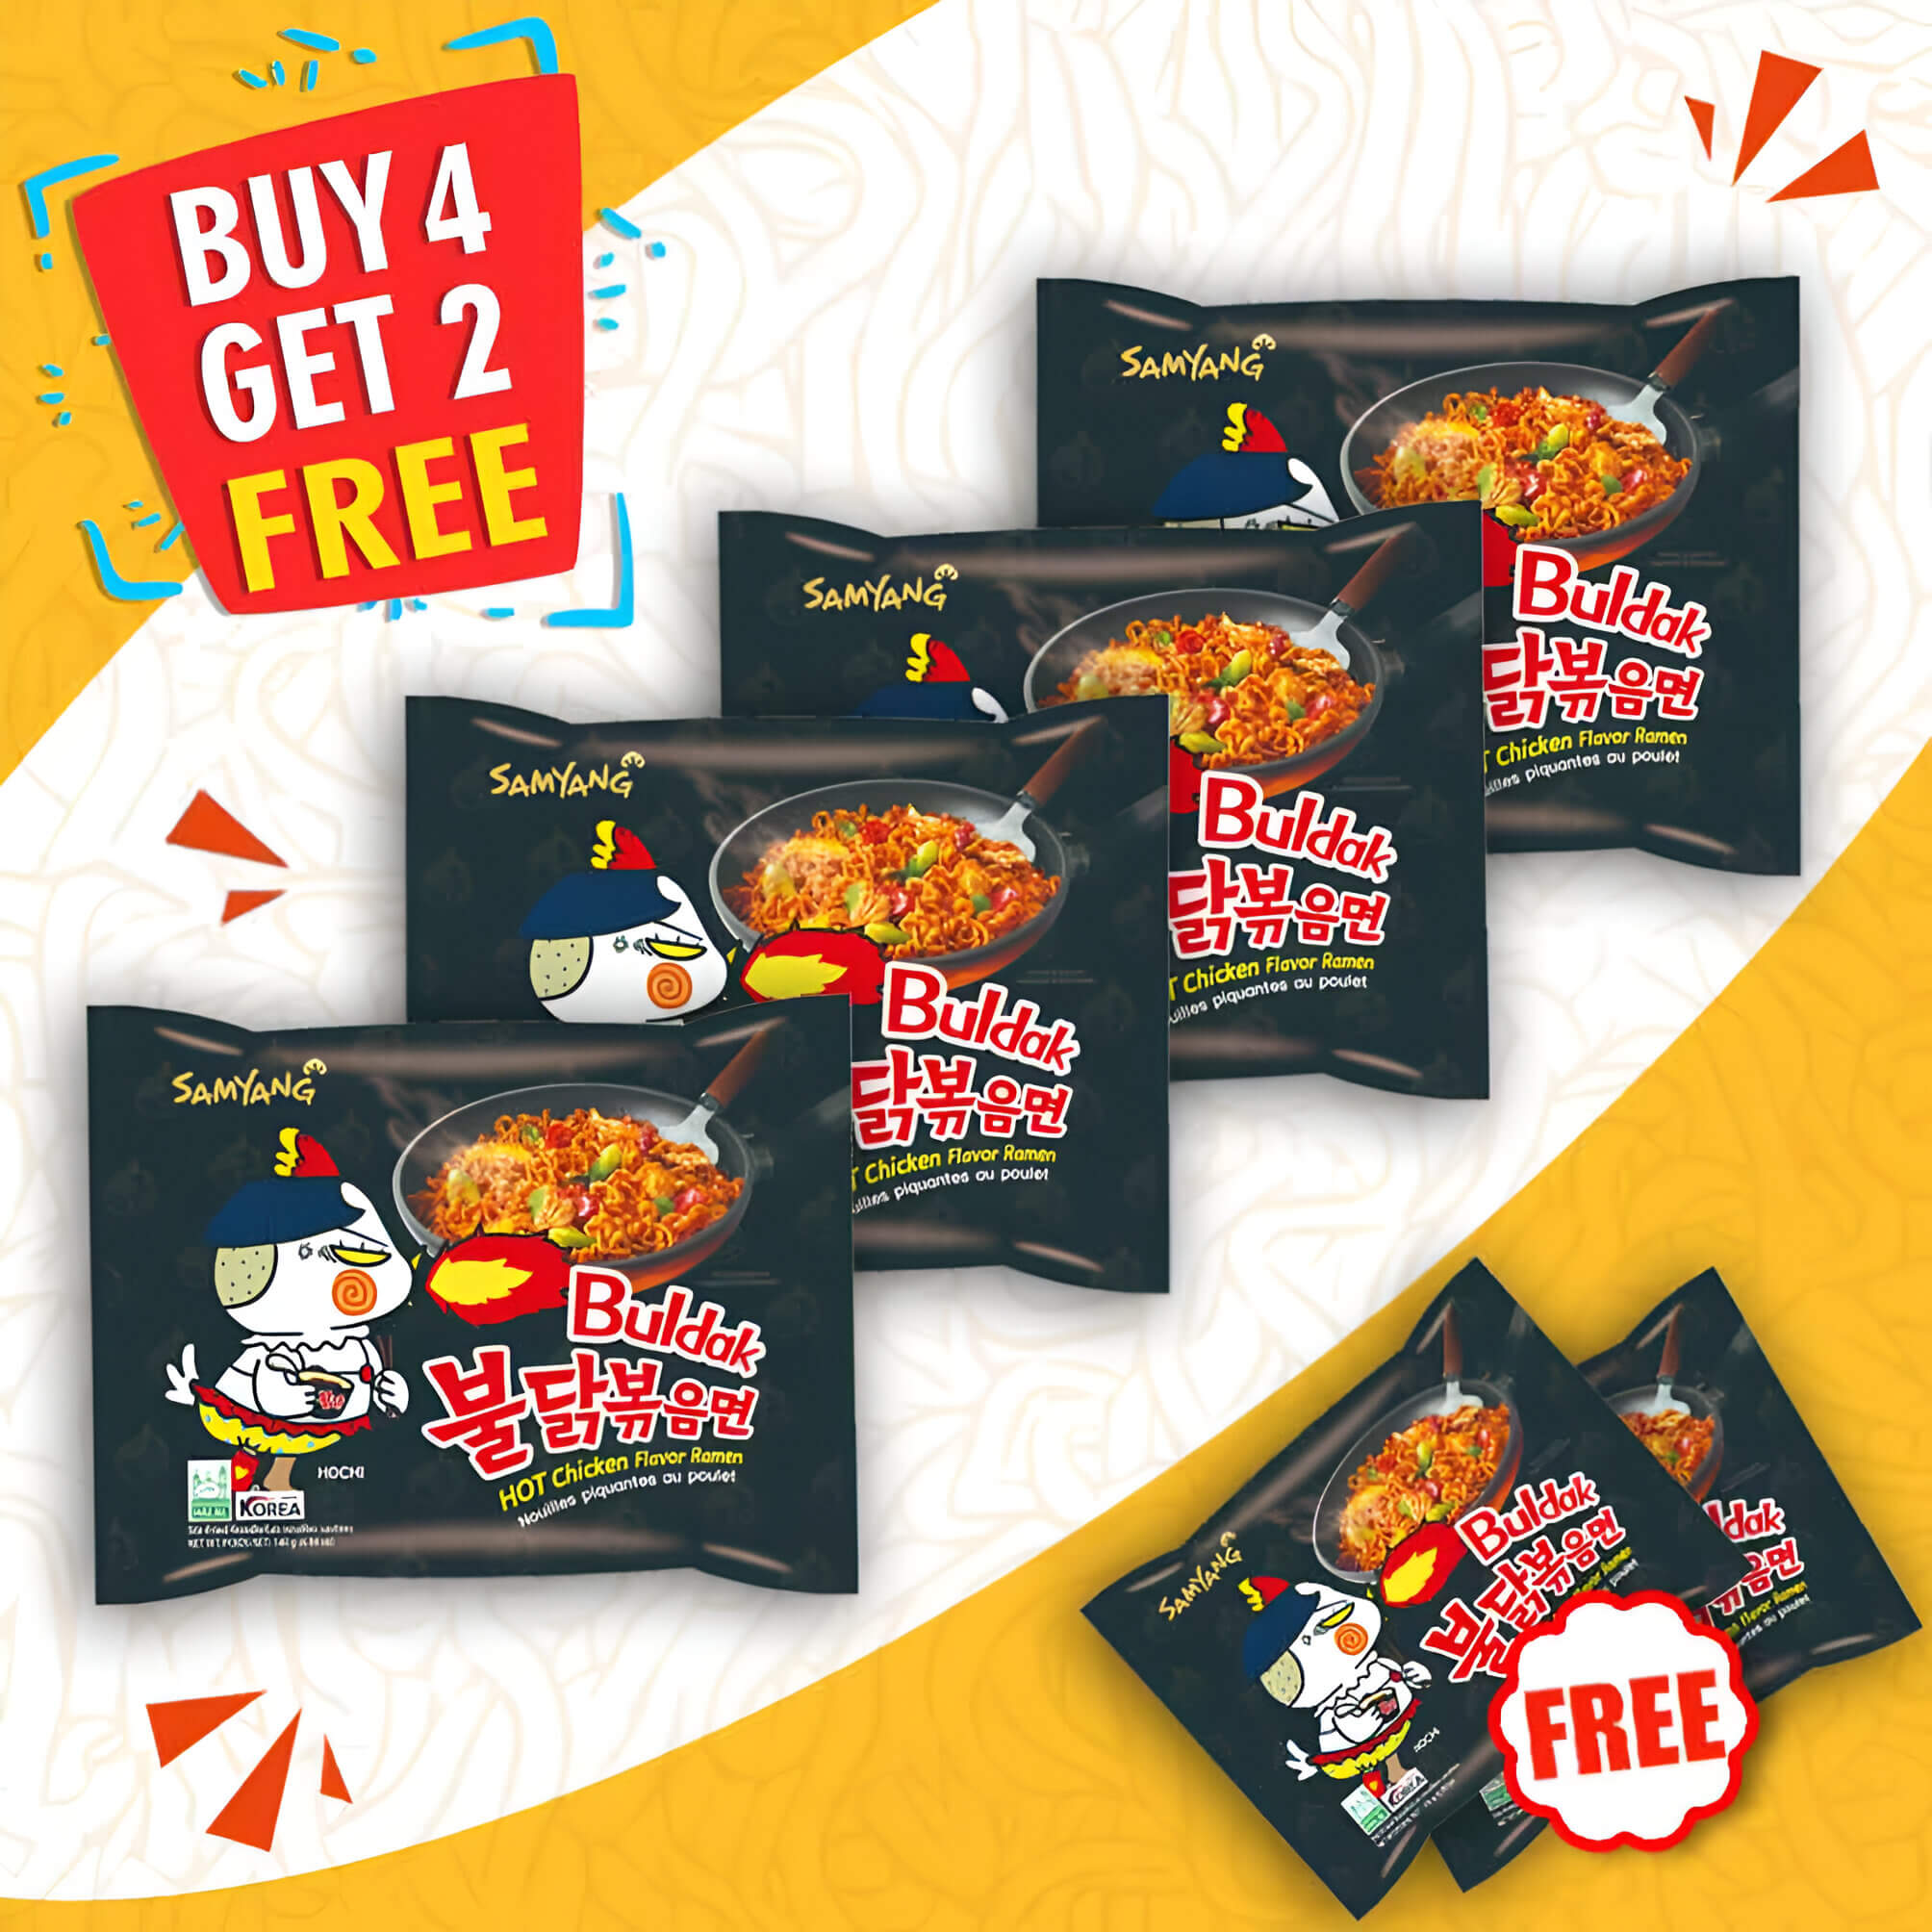 1694519893_1665136057_Samyang-Noodles-Hot-Chicken-Pouch-Buy-4-Get-2-Free (1) (1)